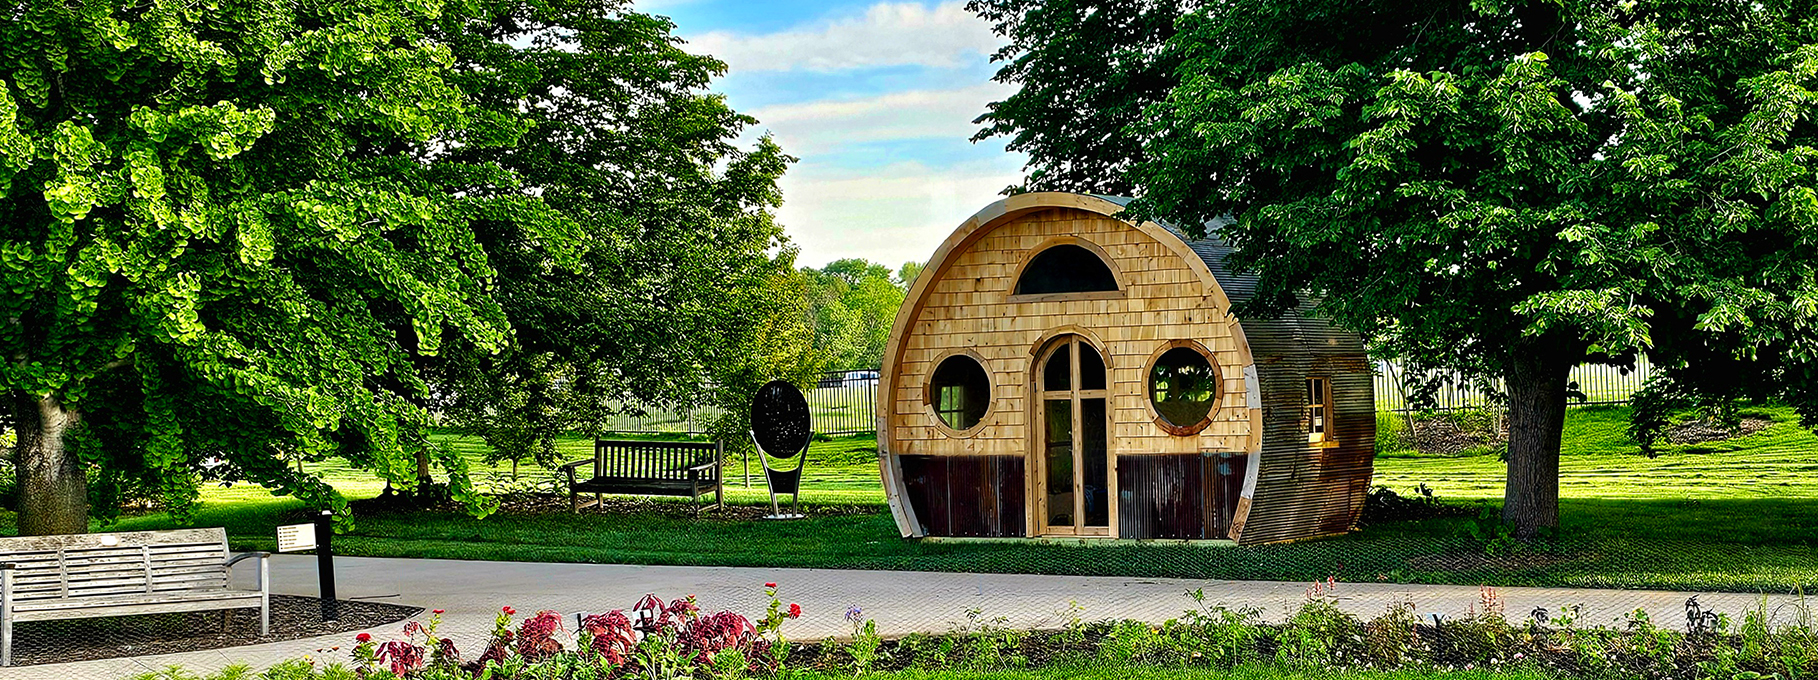 Round playhouse in the woods